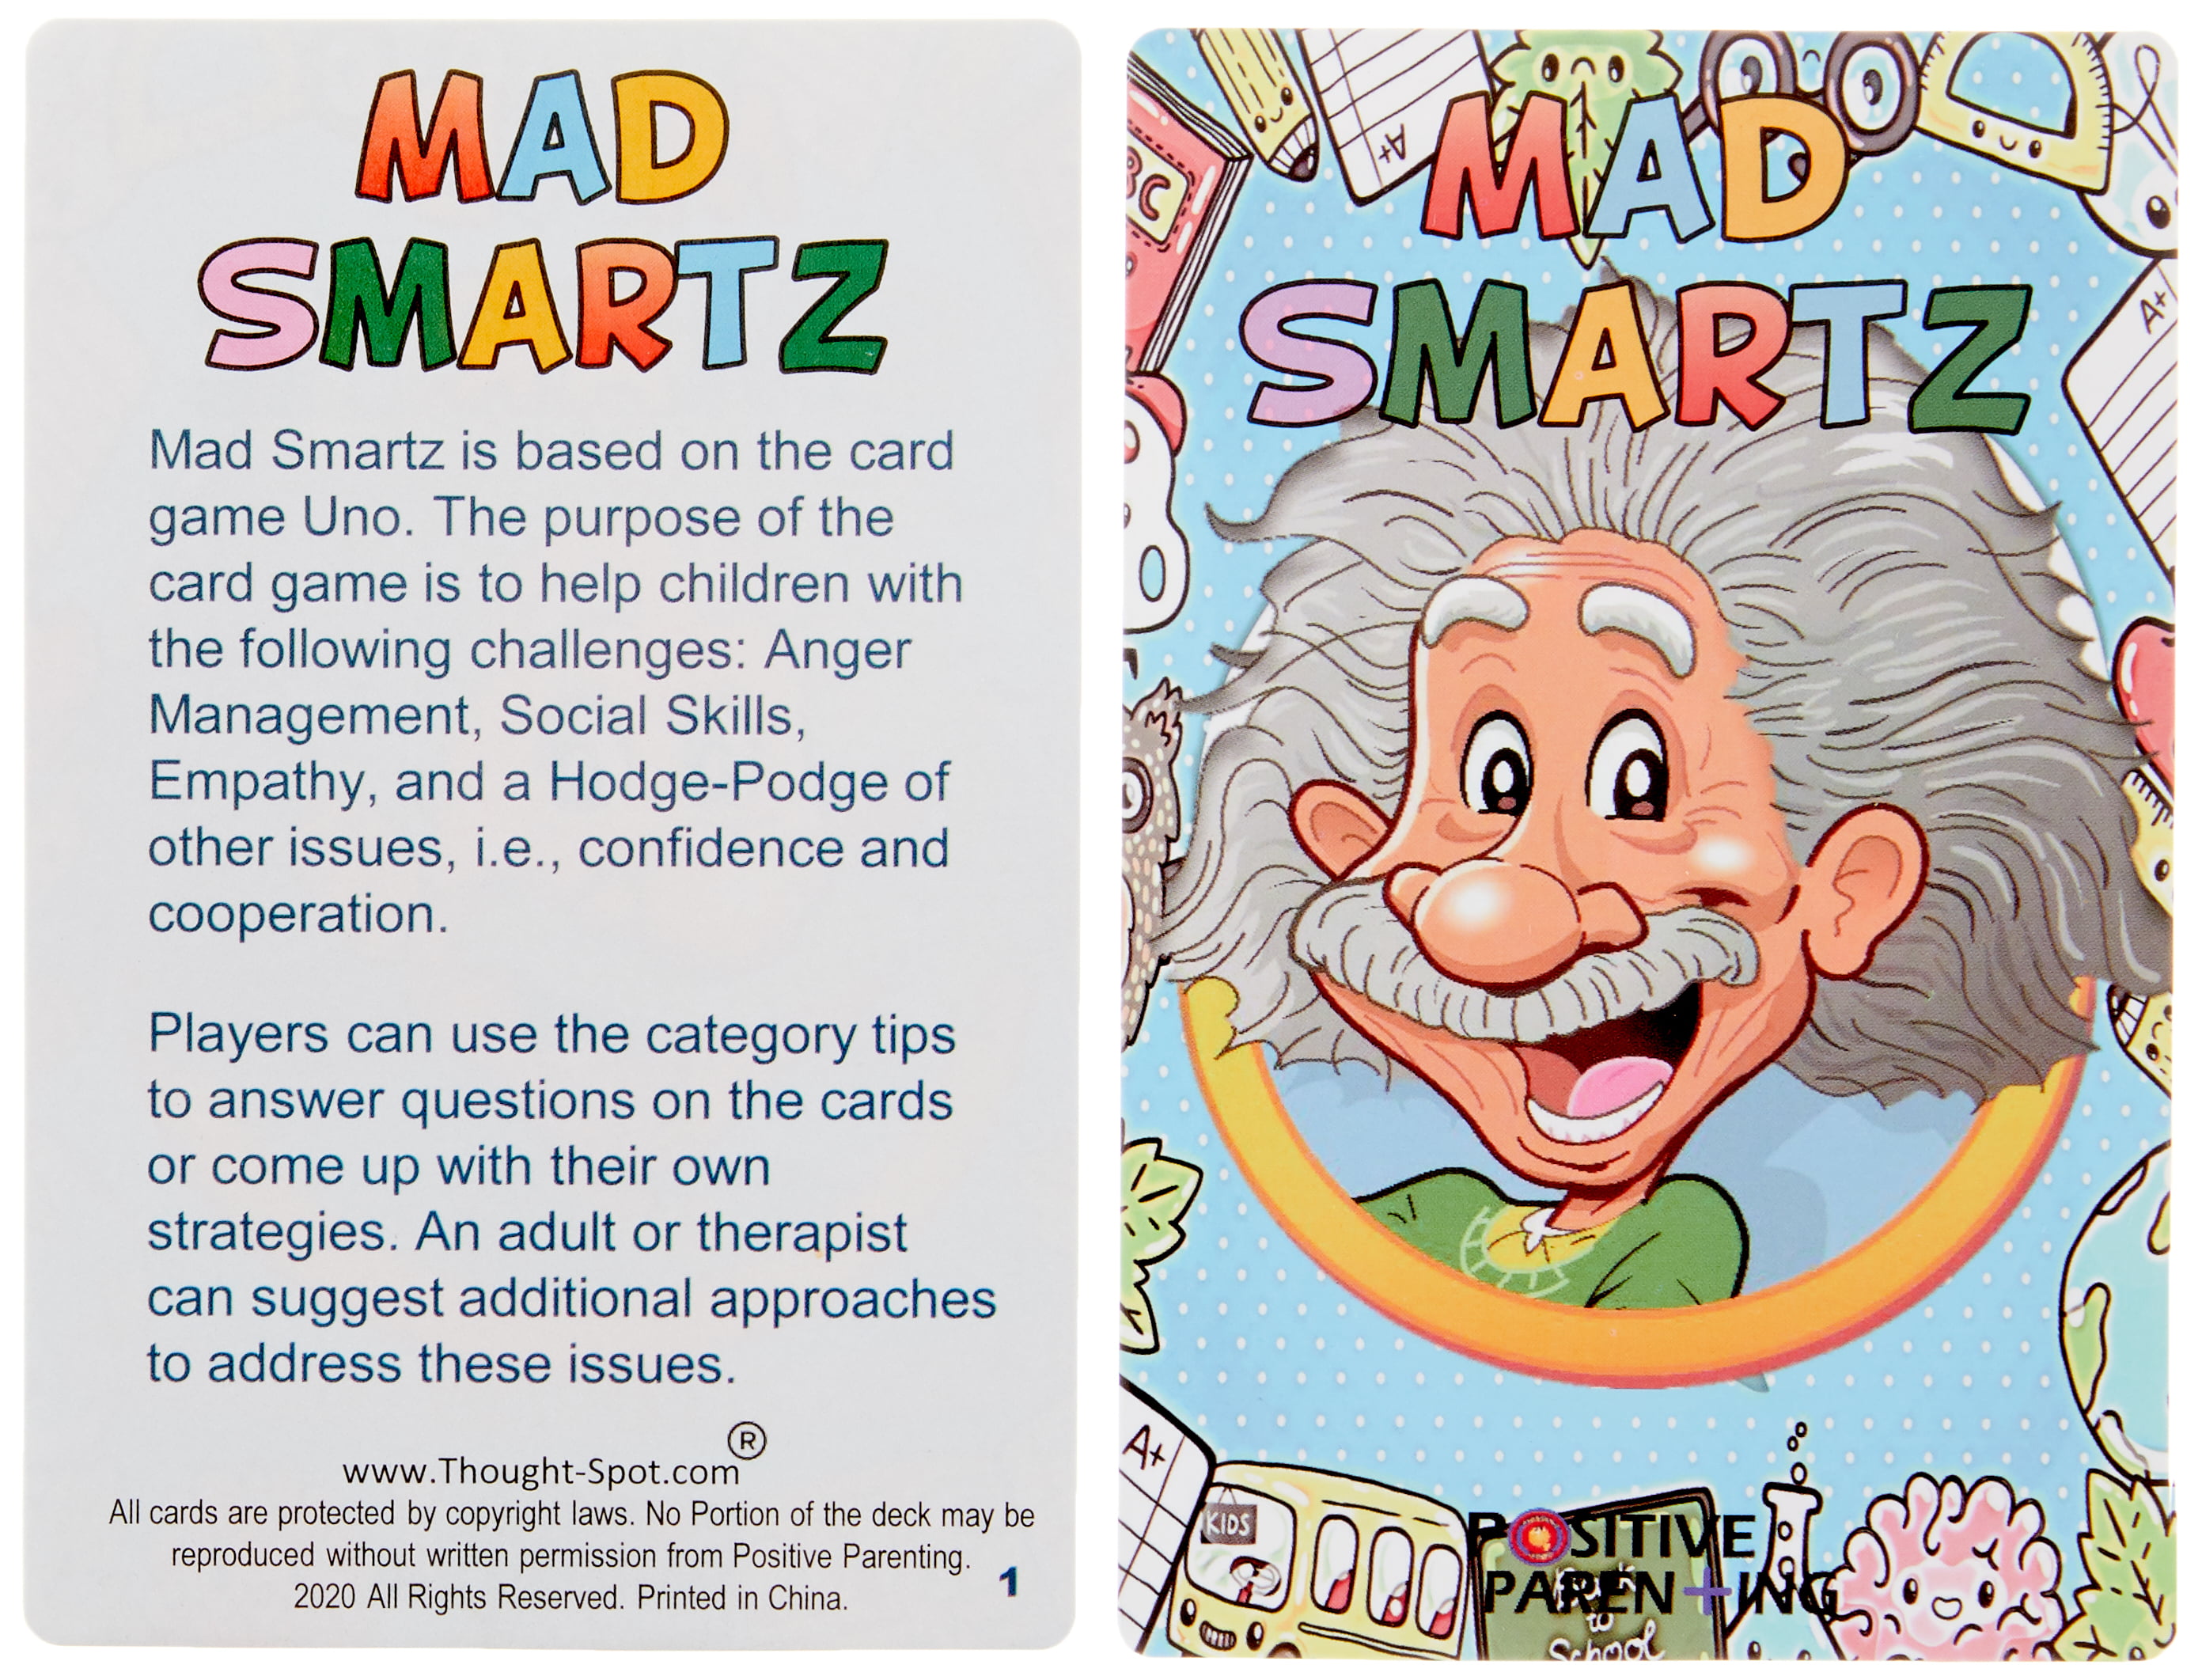 An Interpersonal Skills Card Game for Anger & Emotion Management MAD SMARTZ and Social Skills; Top Educational Learning Resource for Kids & Adults; Fun for School and Therapy; 117 Cards Empathy 